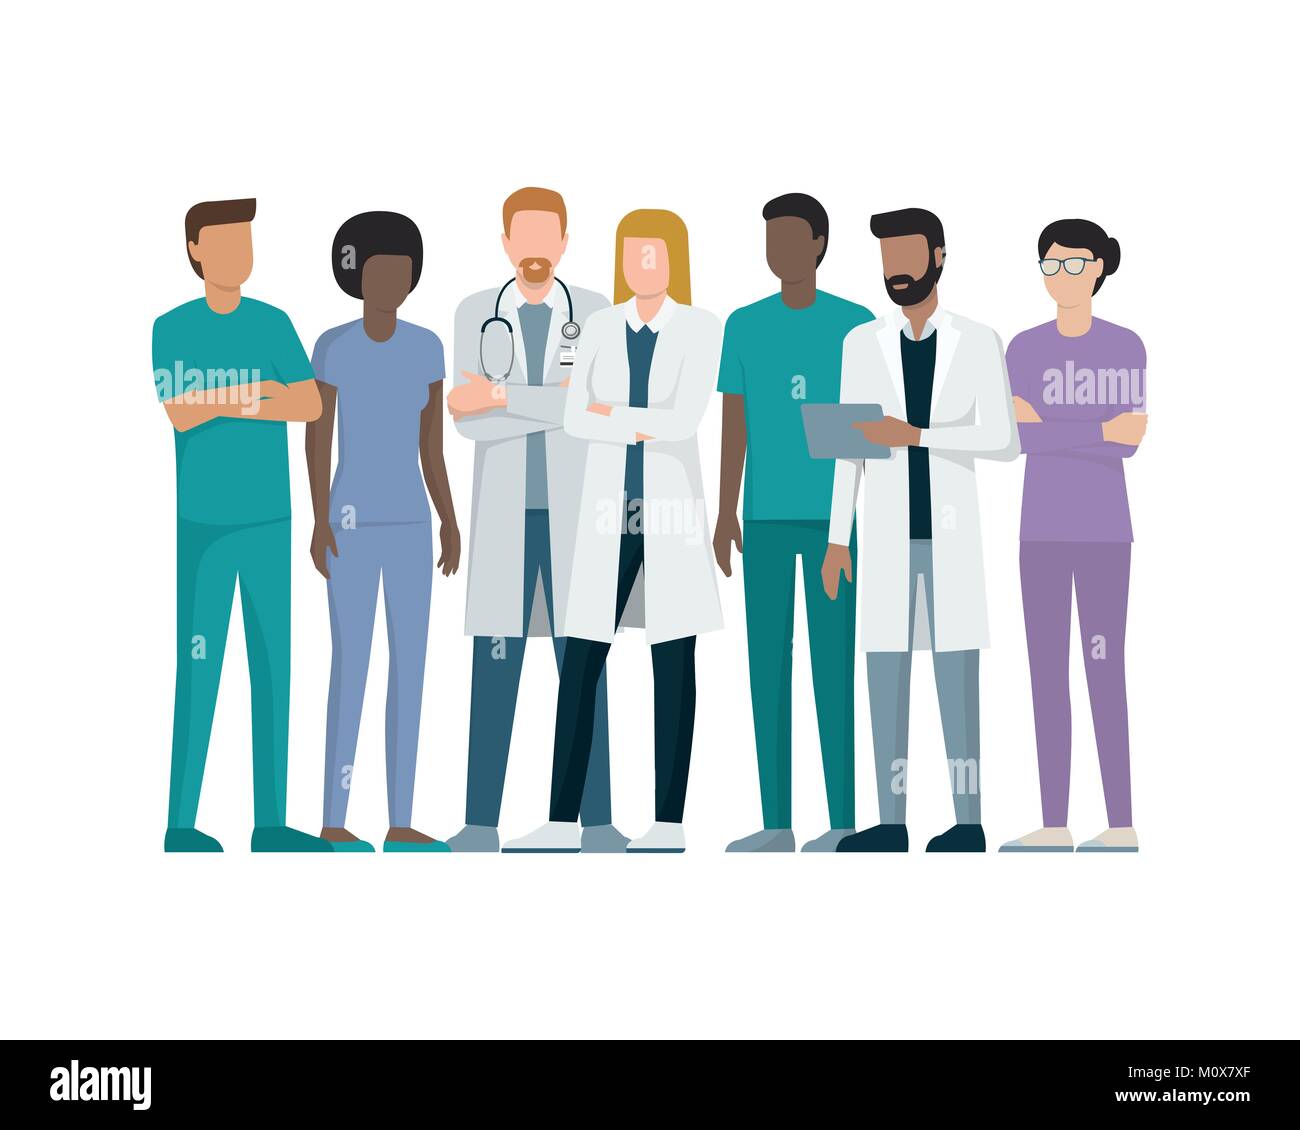 Multiethnic team of doctors and nurses standing together, healthcare and medicine concept Stock Vector